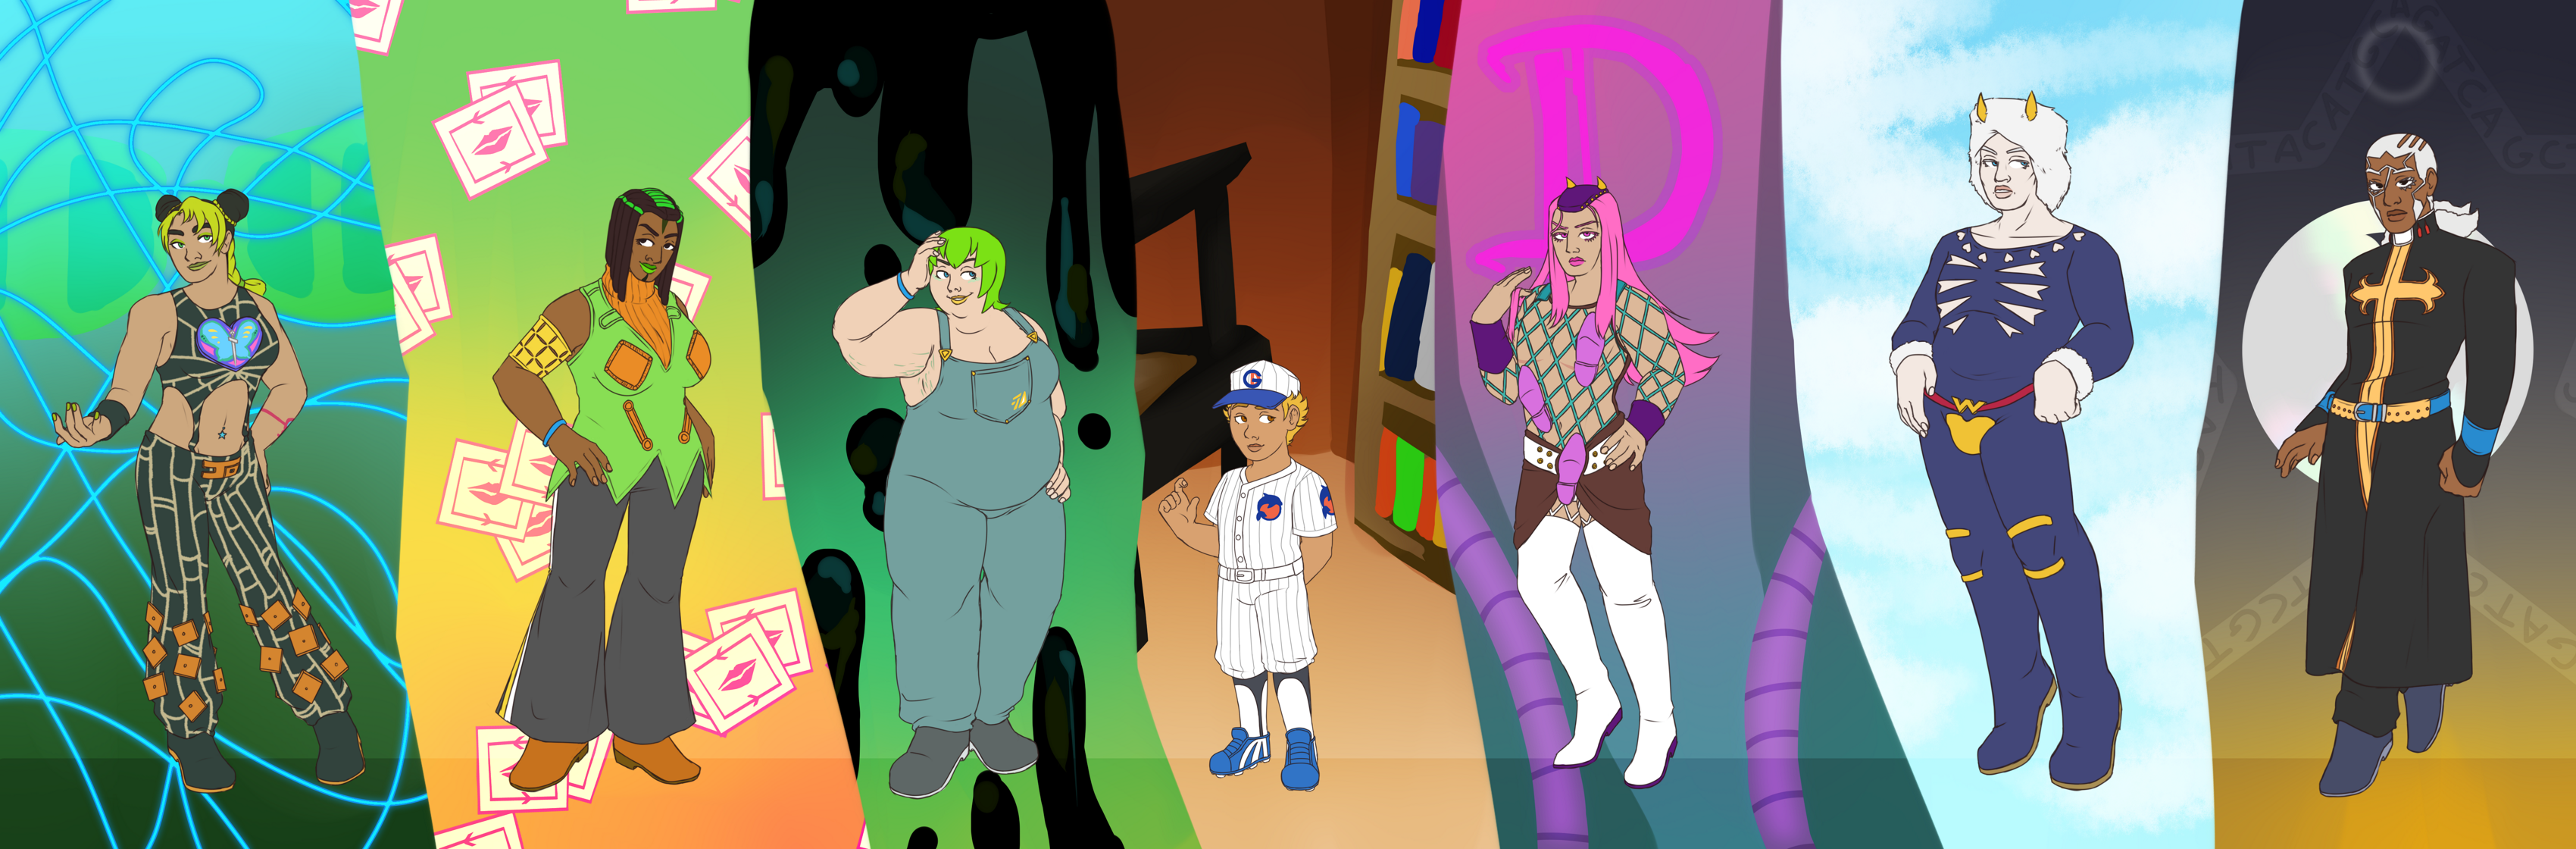 drawings of Jolyne Cujoh, Ermes Costello, Foo Fighters, Emporio Alnino, Narciso Anasui, Weather Report, and Enrico Pucci from Jojo's Bizarre Adventure: Stone Ocean. Each character is in front of a background themed after their Stand.